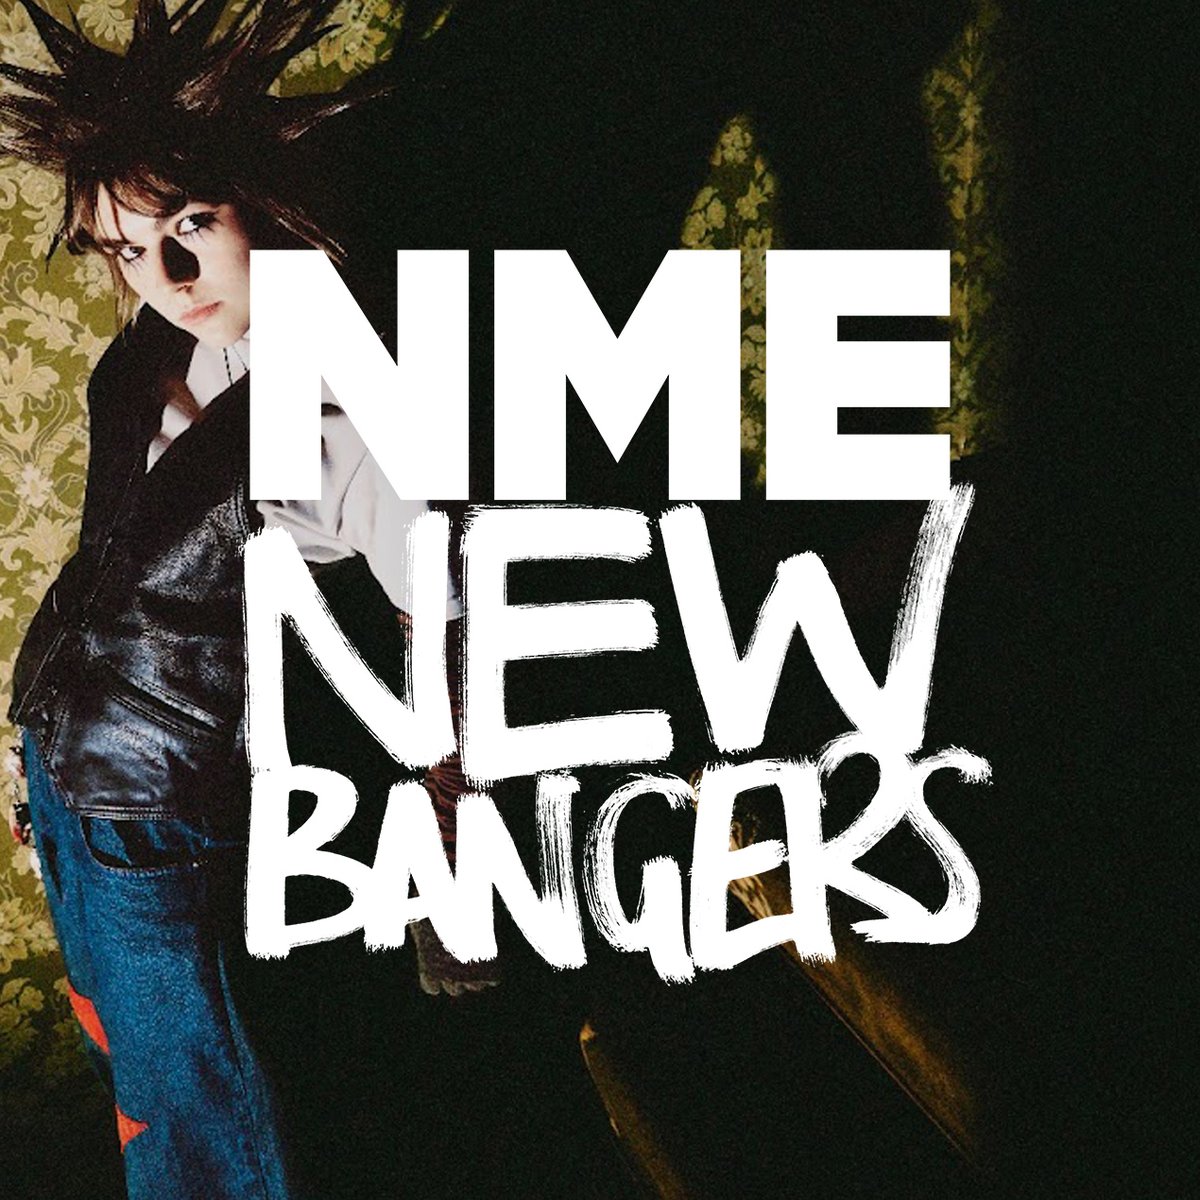 Listen and subscribe to NME's New Bangers each and every week, with huge new tunes from... Ratbag @melin_melynband @GetdownServices @NewDad @overpass_band @ayanna @dumbbuoys & more! Spotify: open.spotify.com/playlist/0xXZW… Apple Music: music.apple.com/us/playlist/nm…